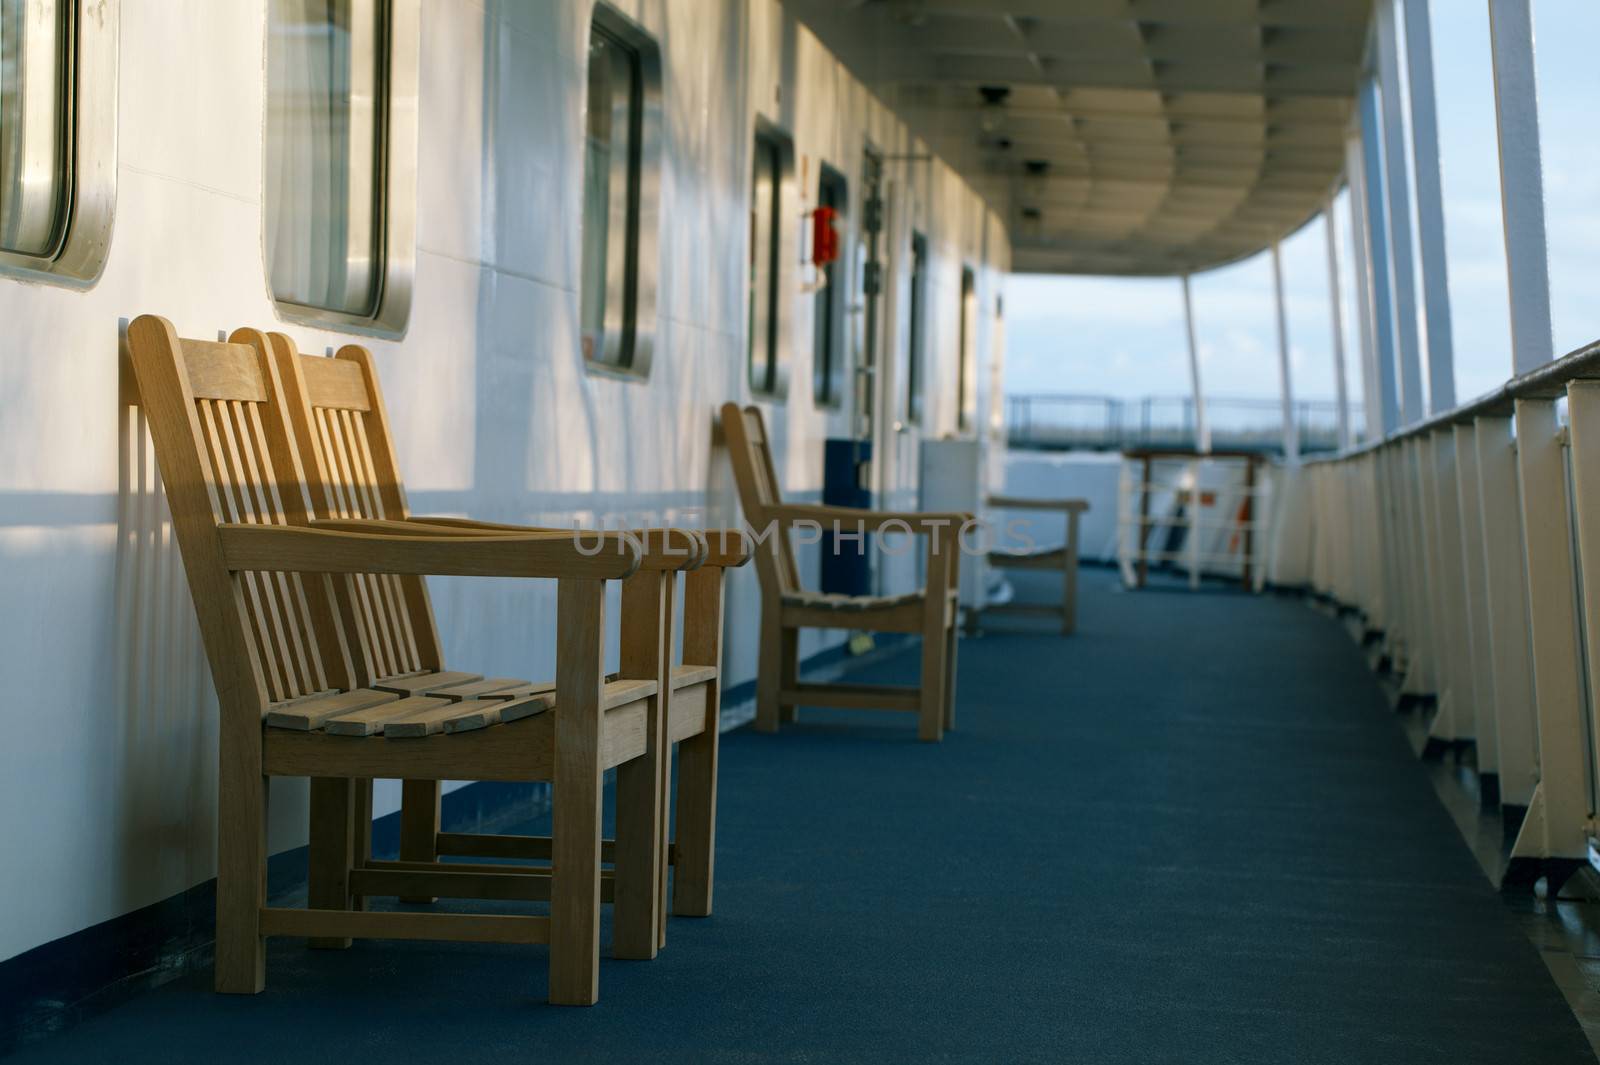 Wooden chairs on the deck of cruise liner by danr13